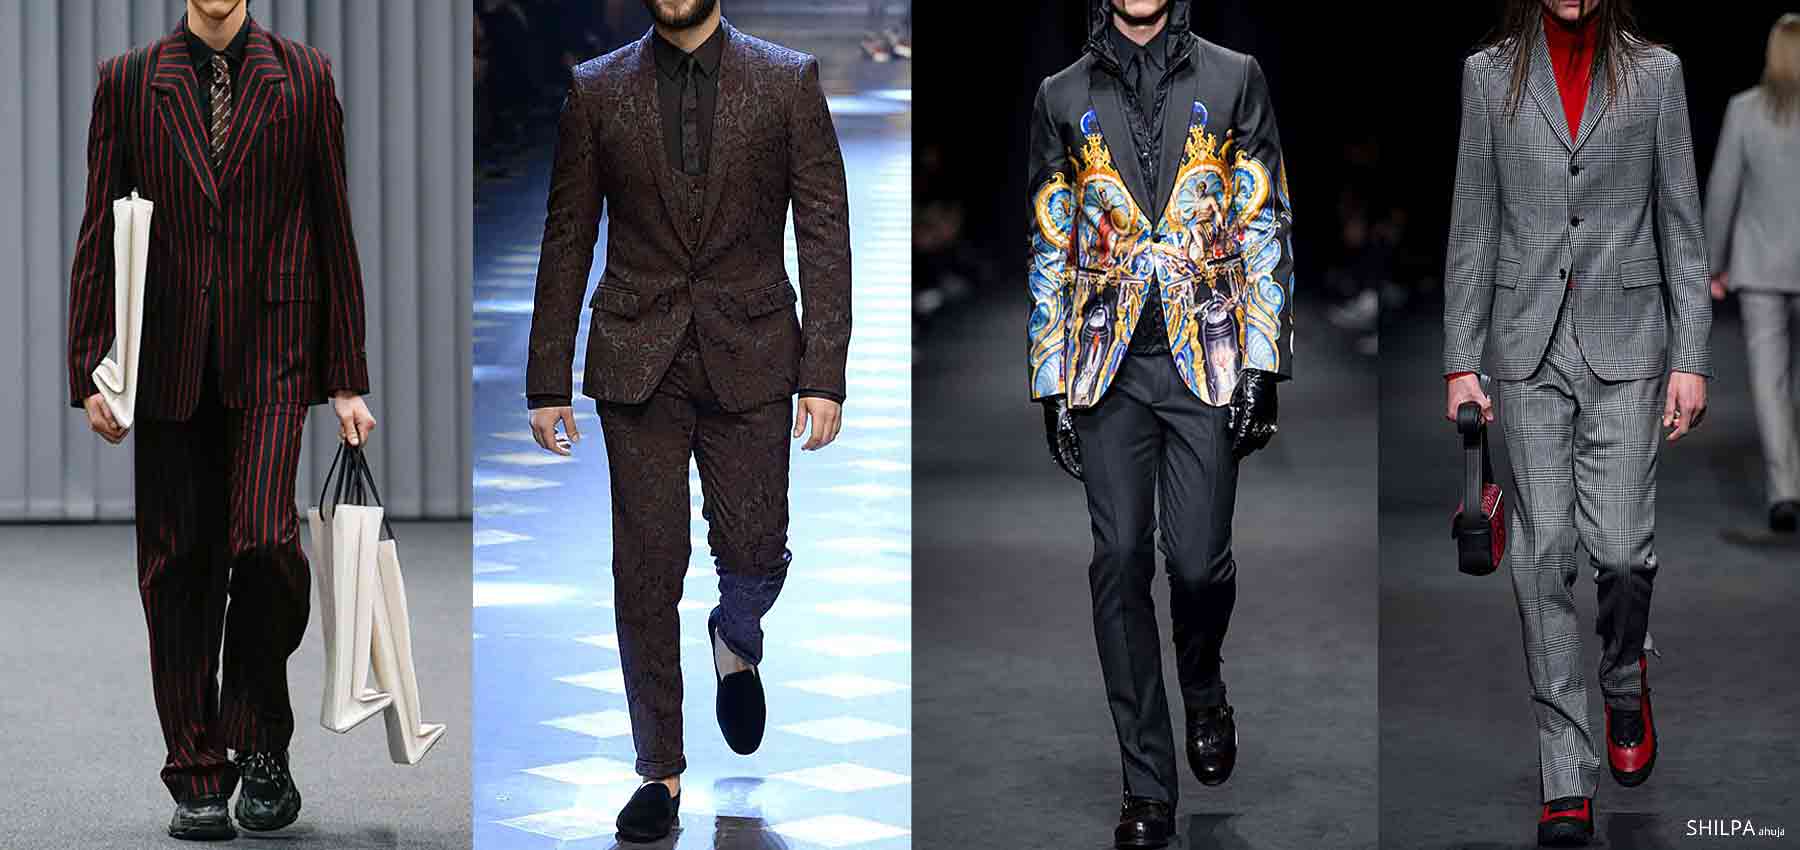 mens-suit-trends-stripes-art-prints-embroidery-suits-brocade-patterns